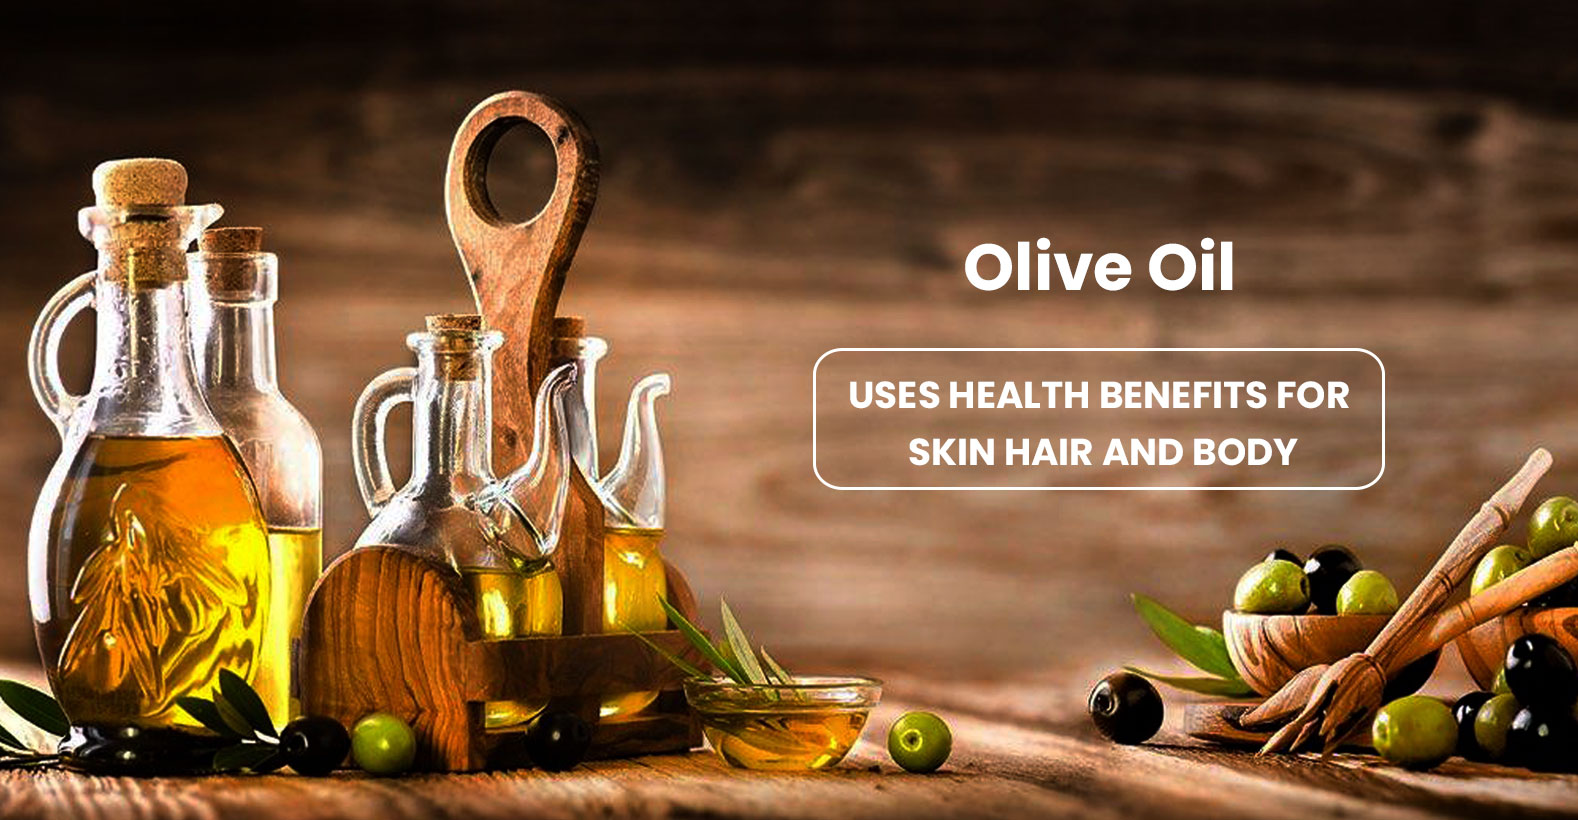 Decoding Olive Oil: Understanding the Difference Between Cheap and